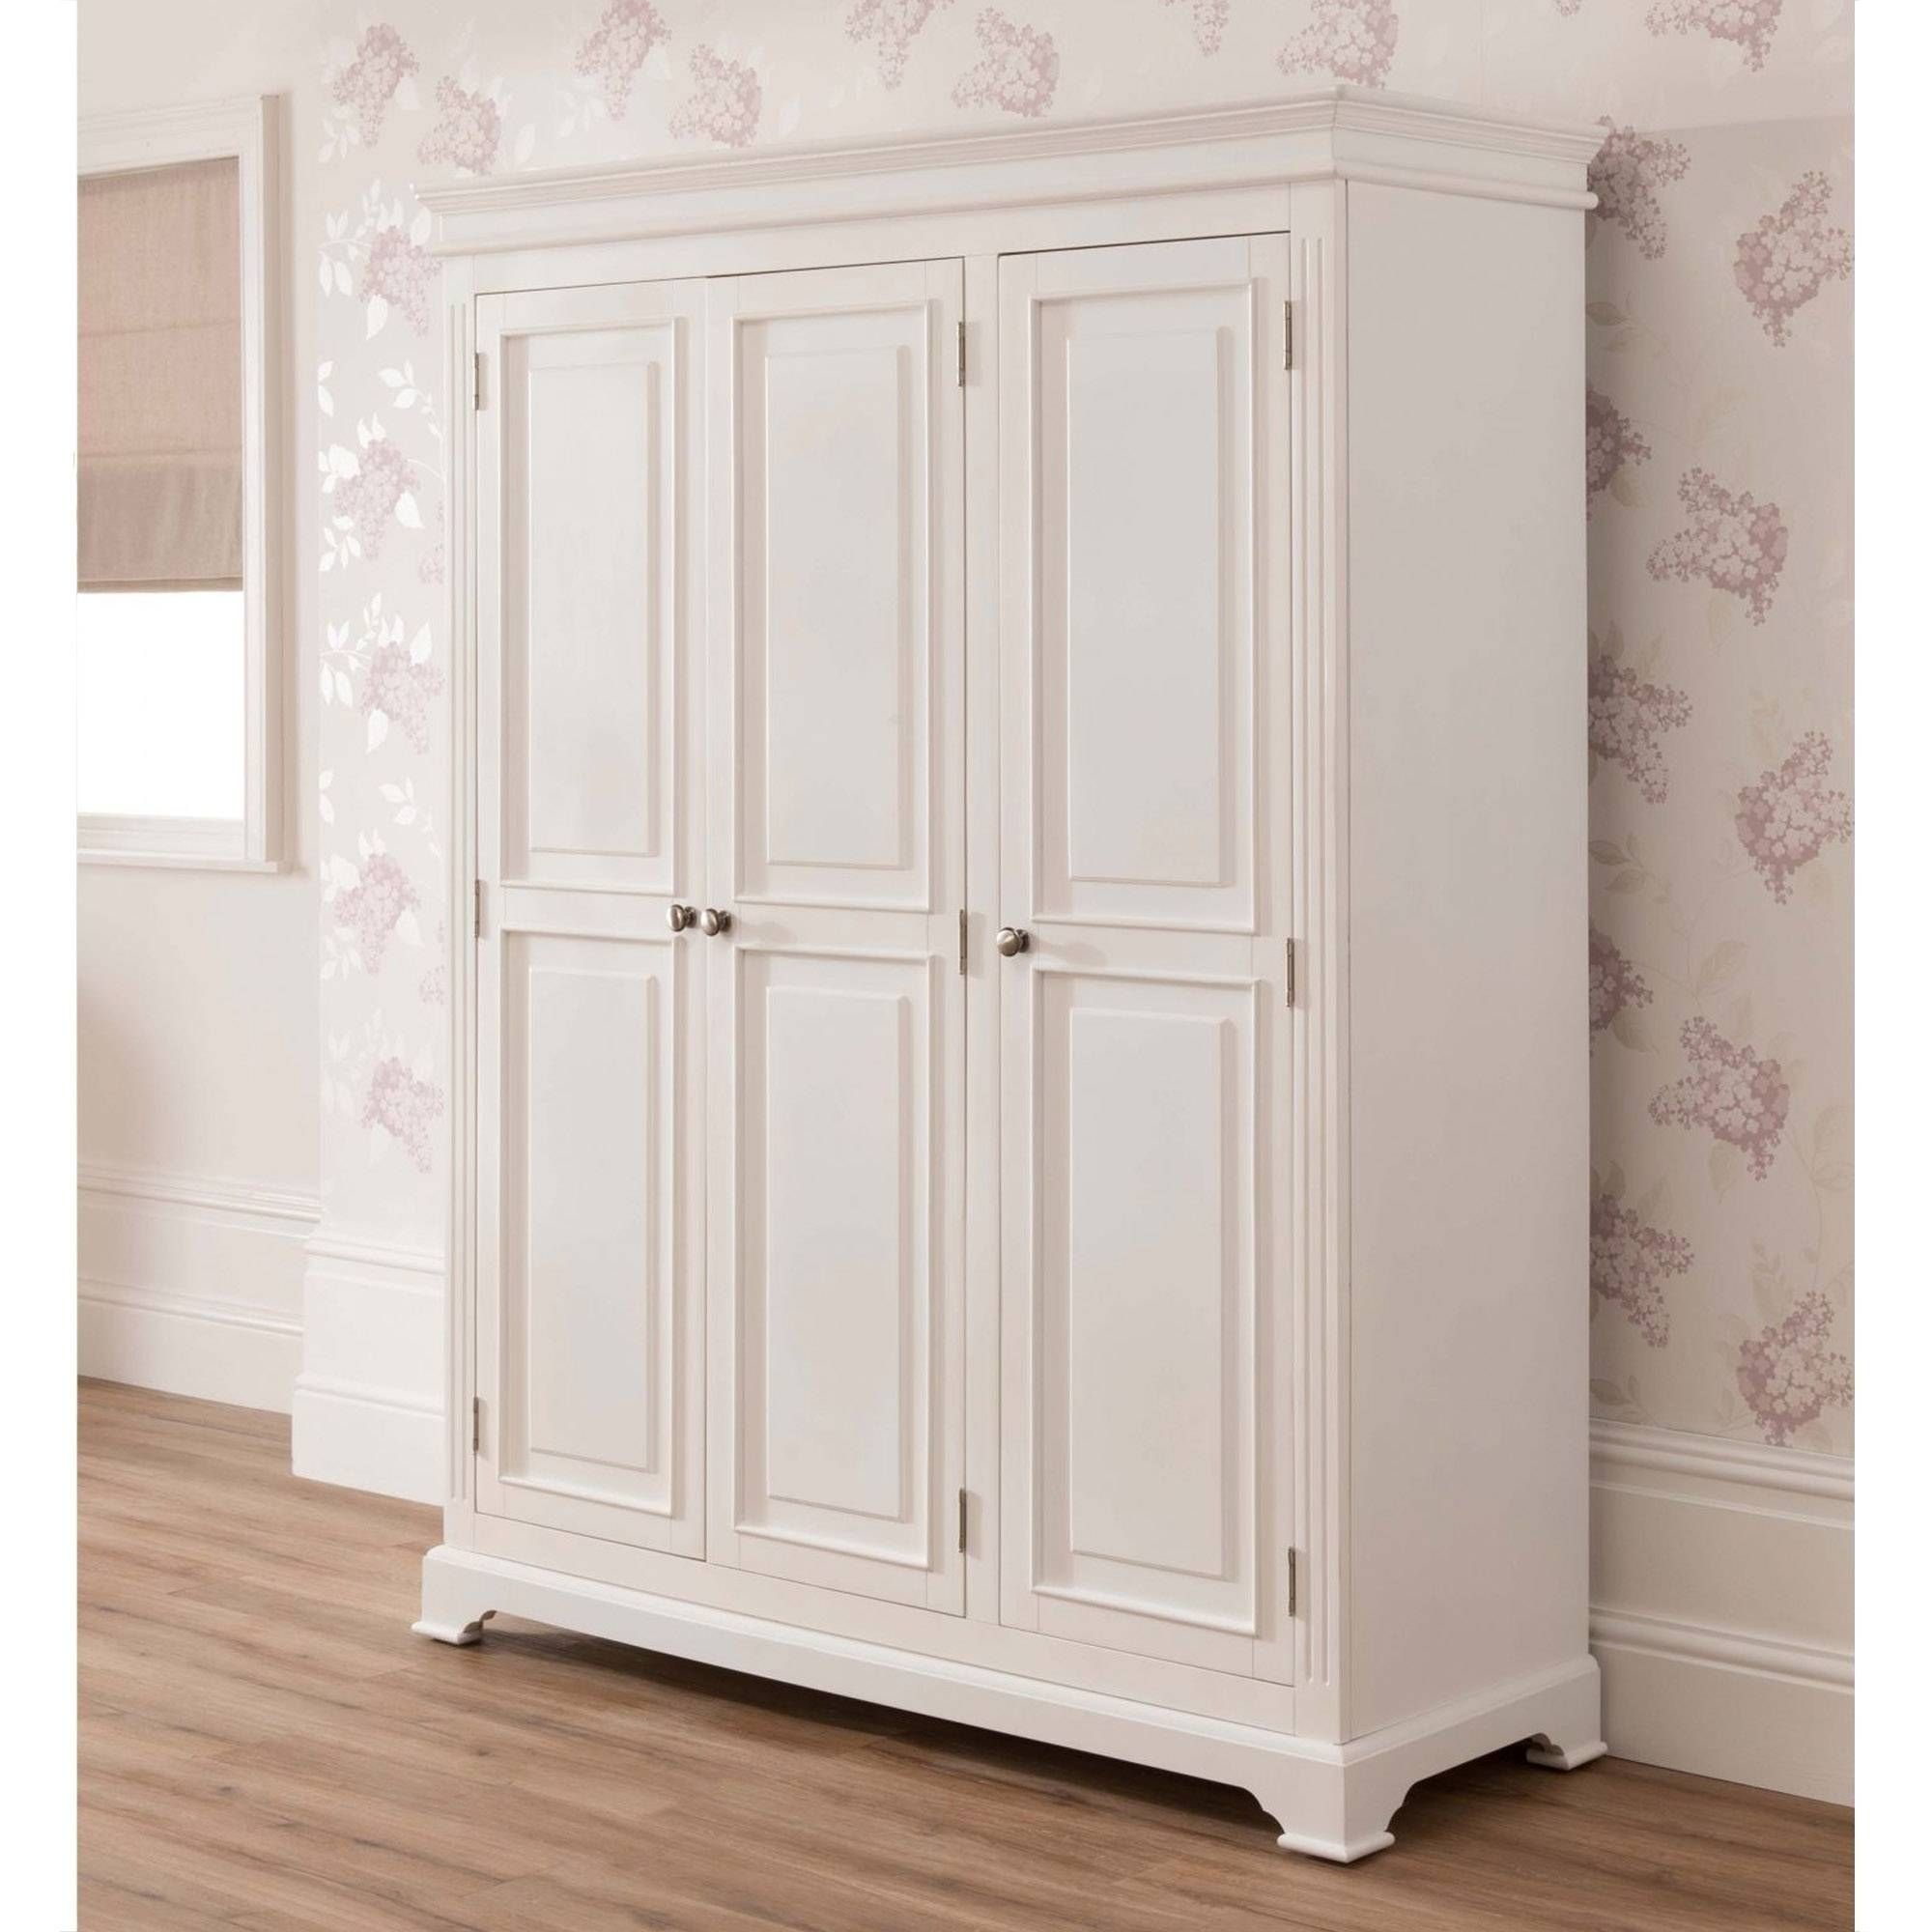 Sophia Shabby Chic Wardrobe Is A Fantastic Addition To Our Antique Pertaining To French Shabby Chic Wardrobes (View 5 of 15)